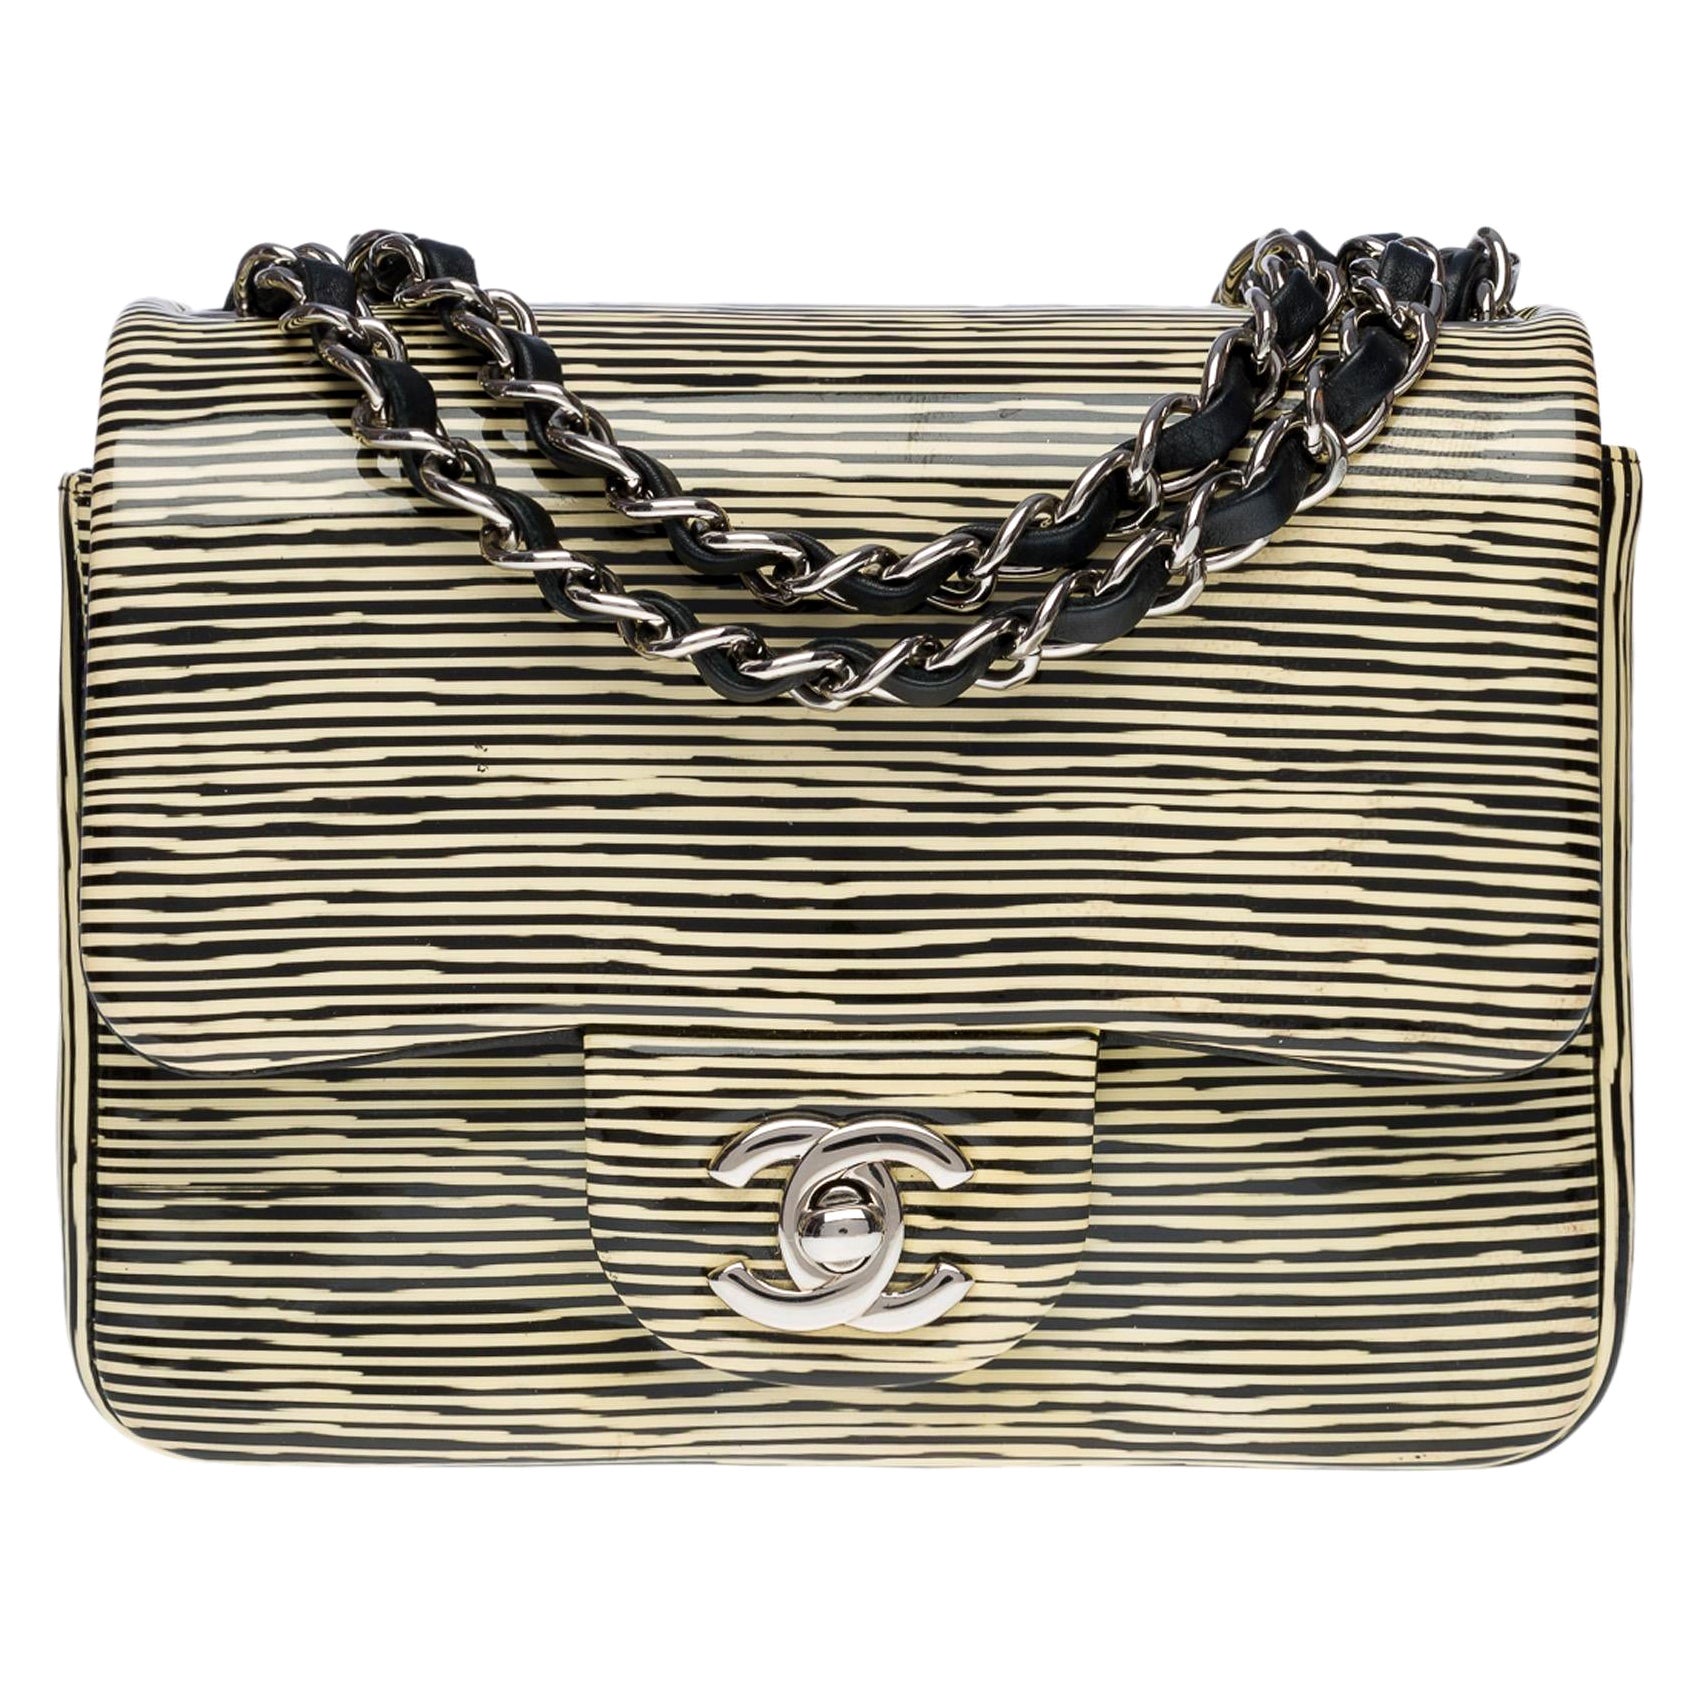 Chanel Timeless Mini Flap bag in black & yellow striped patent leather, SHW